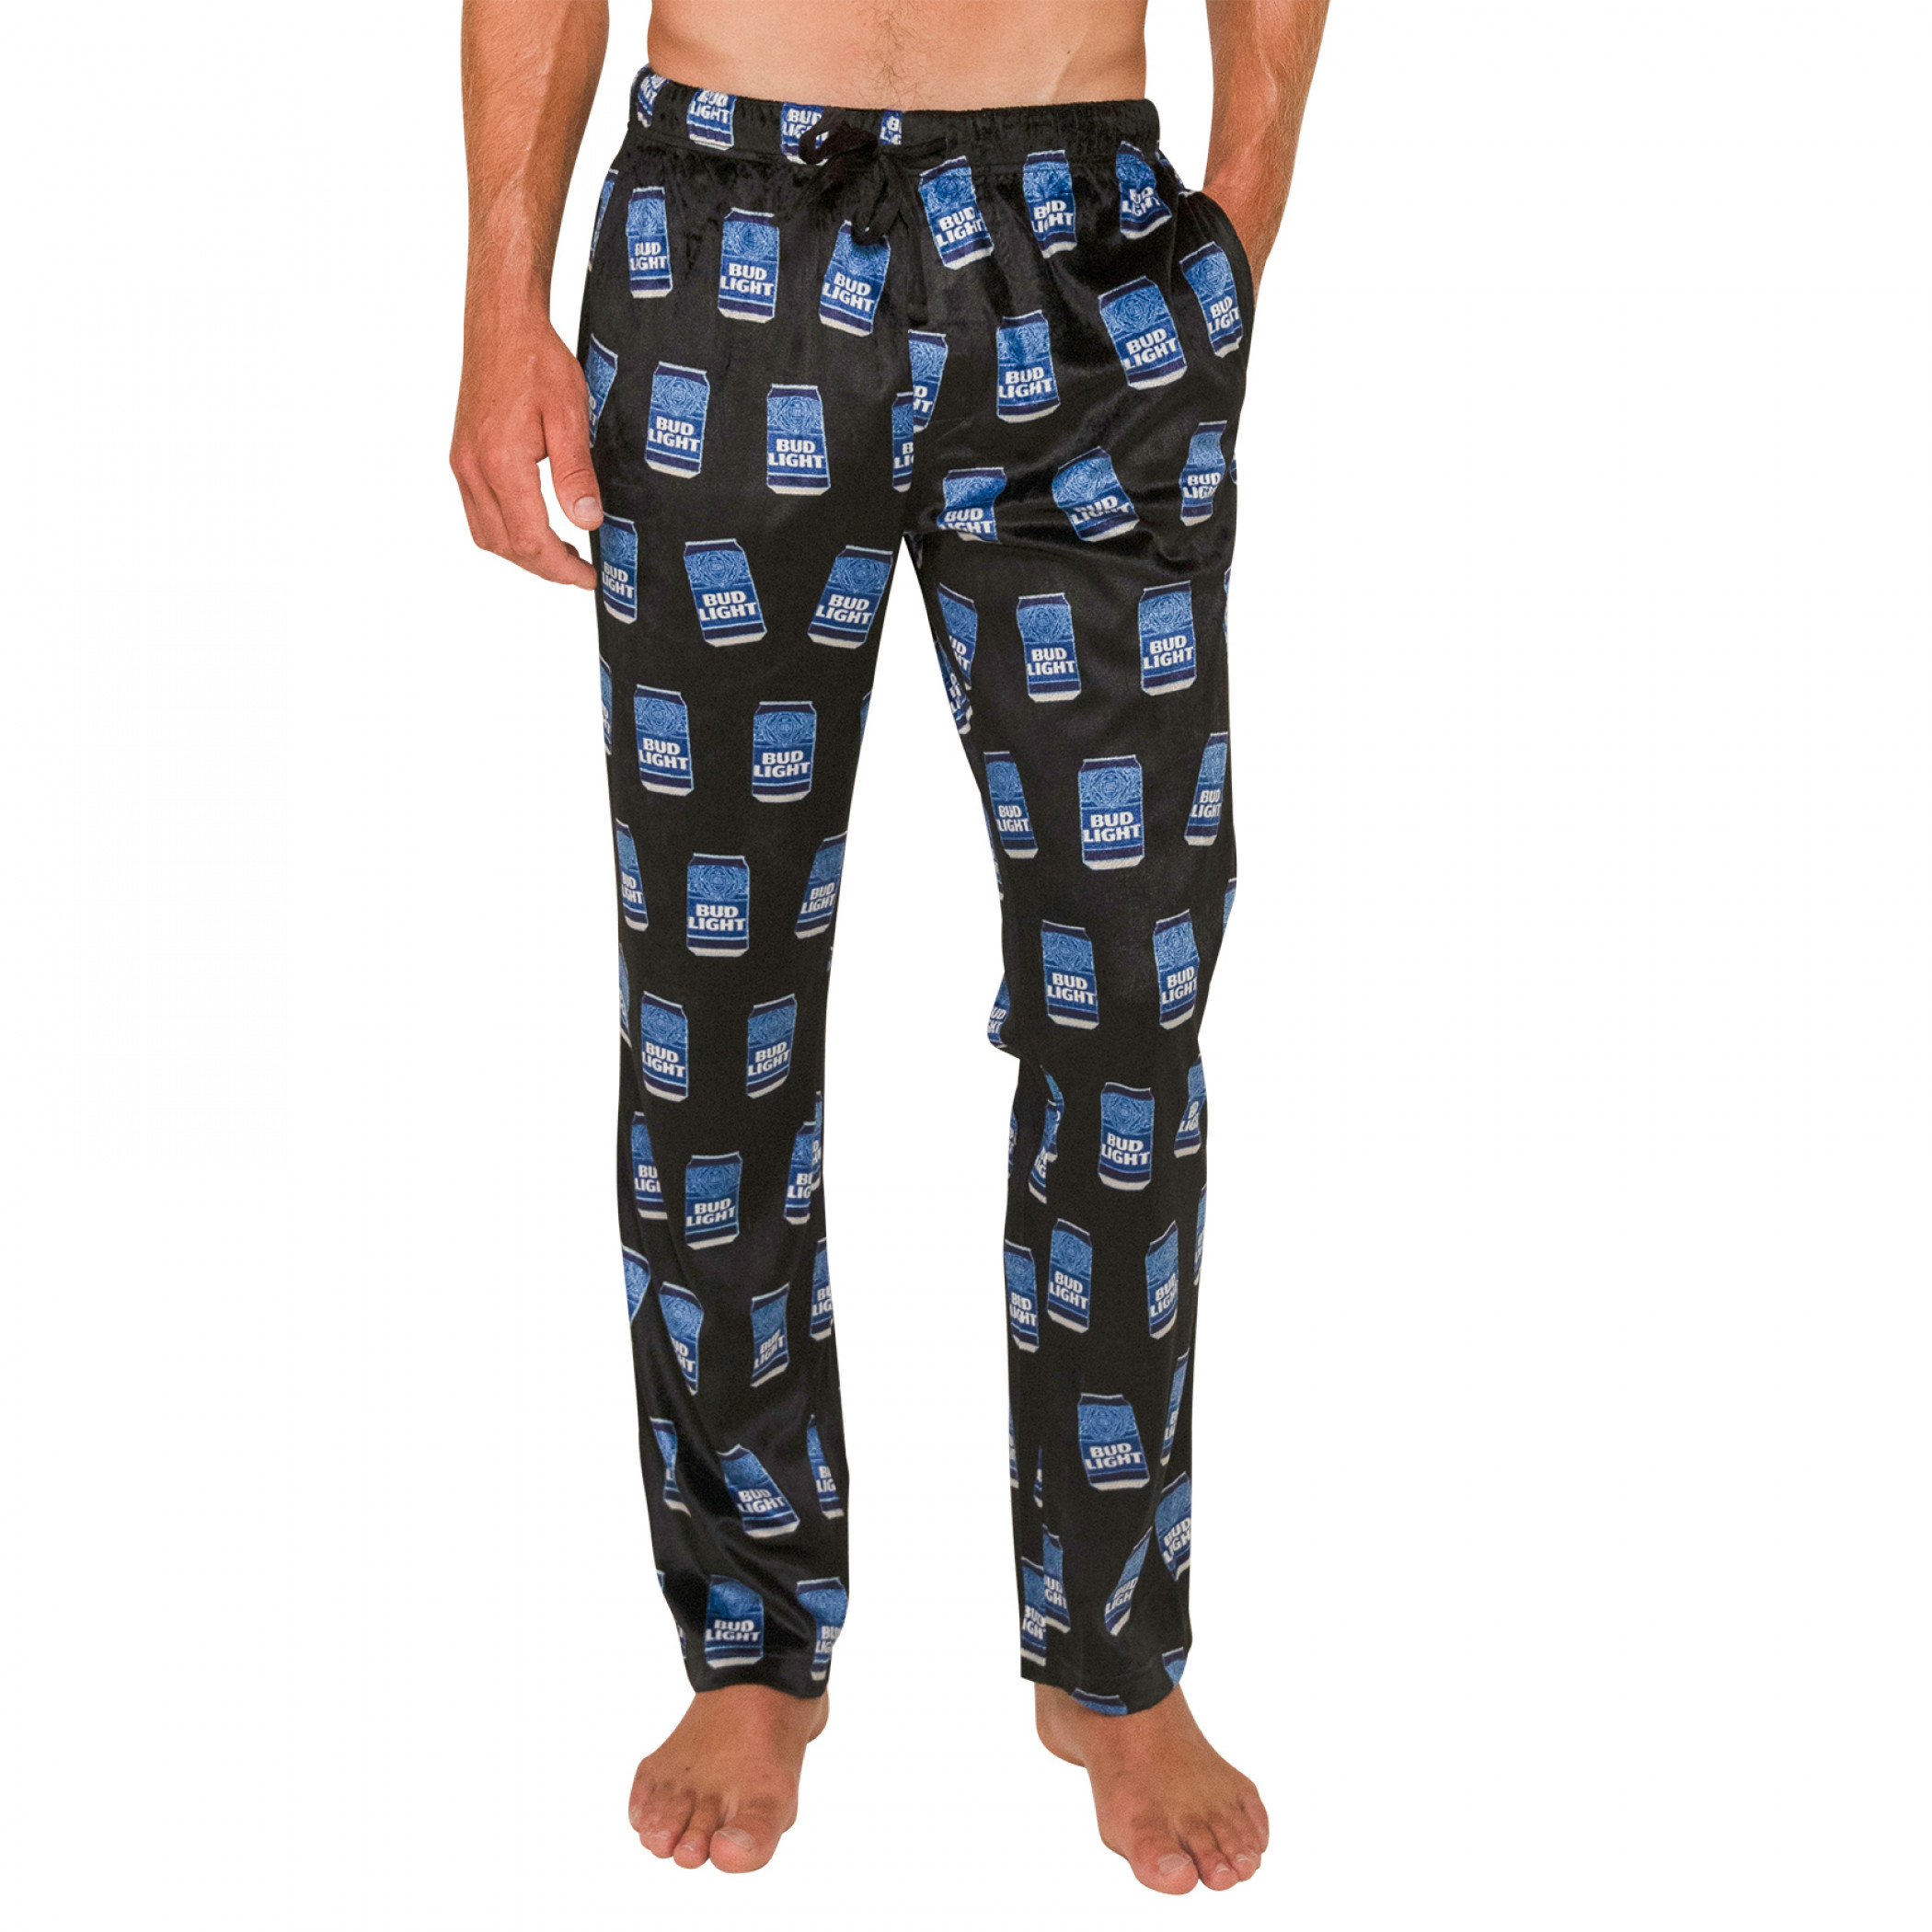 Crazy Boxers Bud Light Cans Pajama Pants